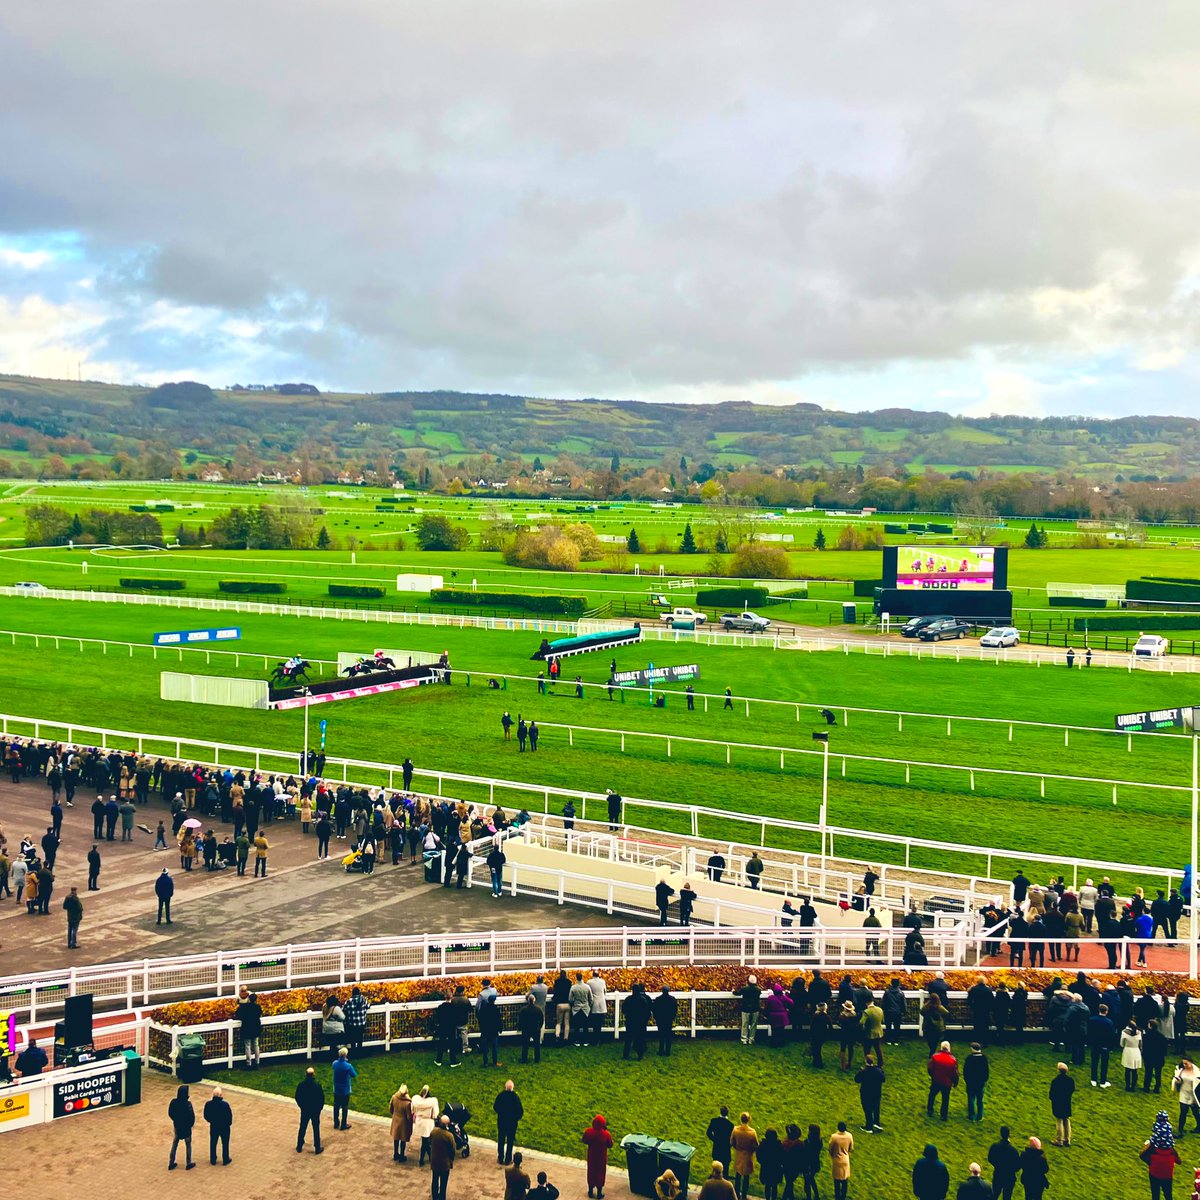 Good luck to all horses, trainers, jockeys and owners competing at this year’s Cheltenham Festival! 🏇